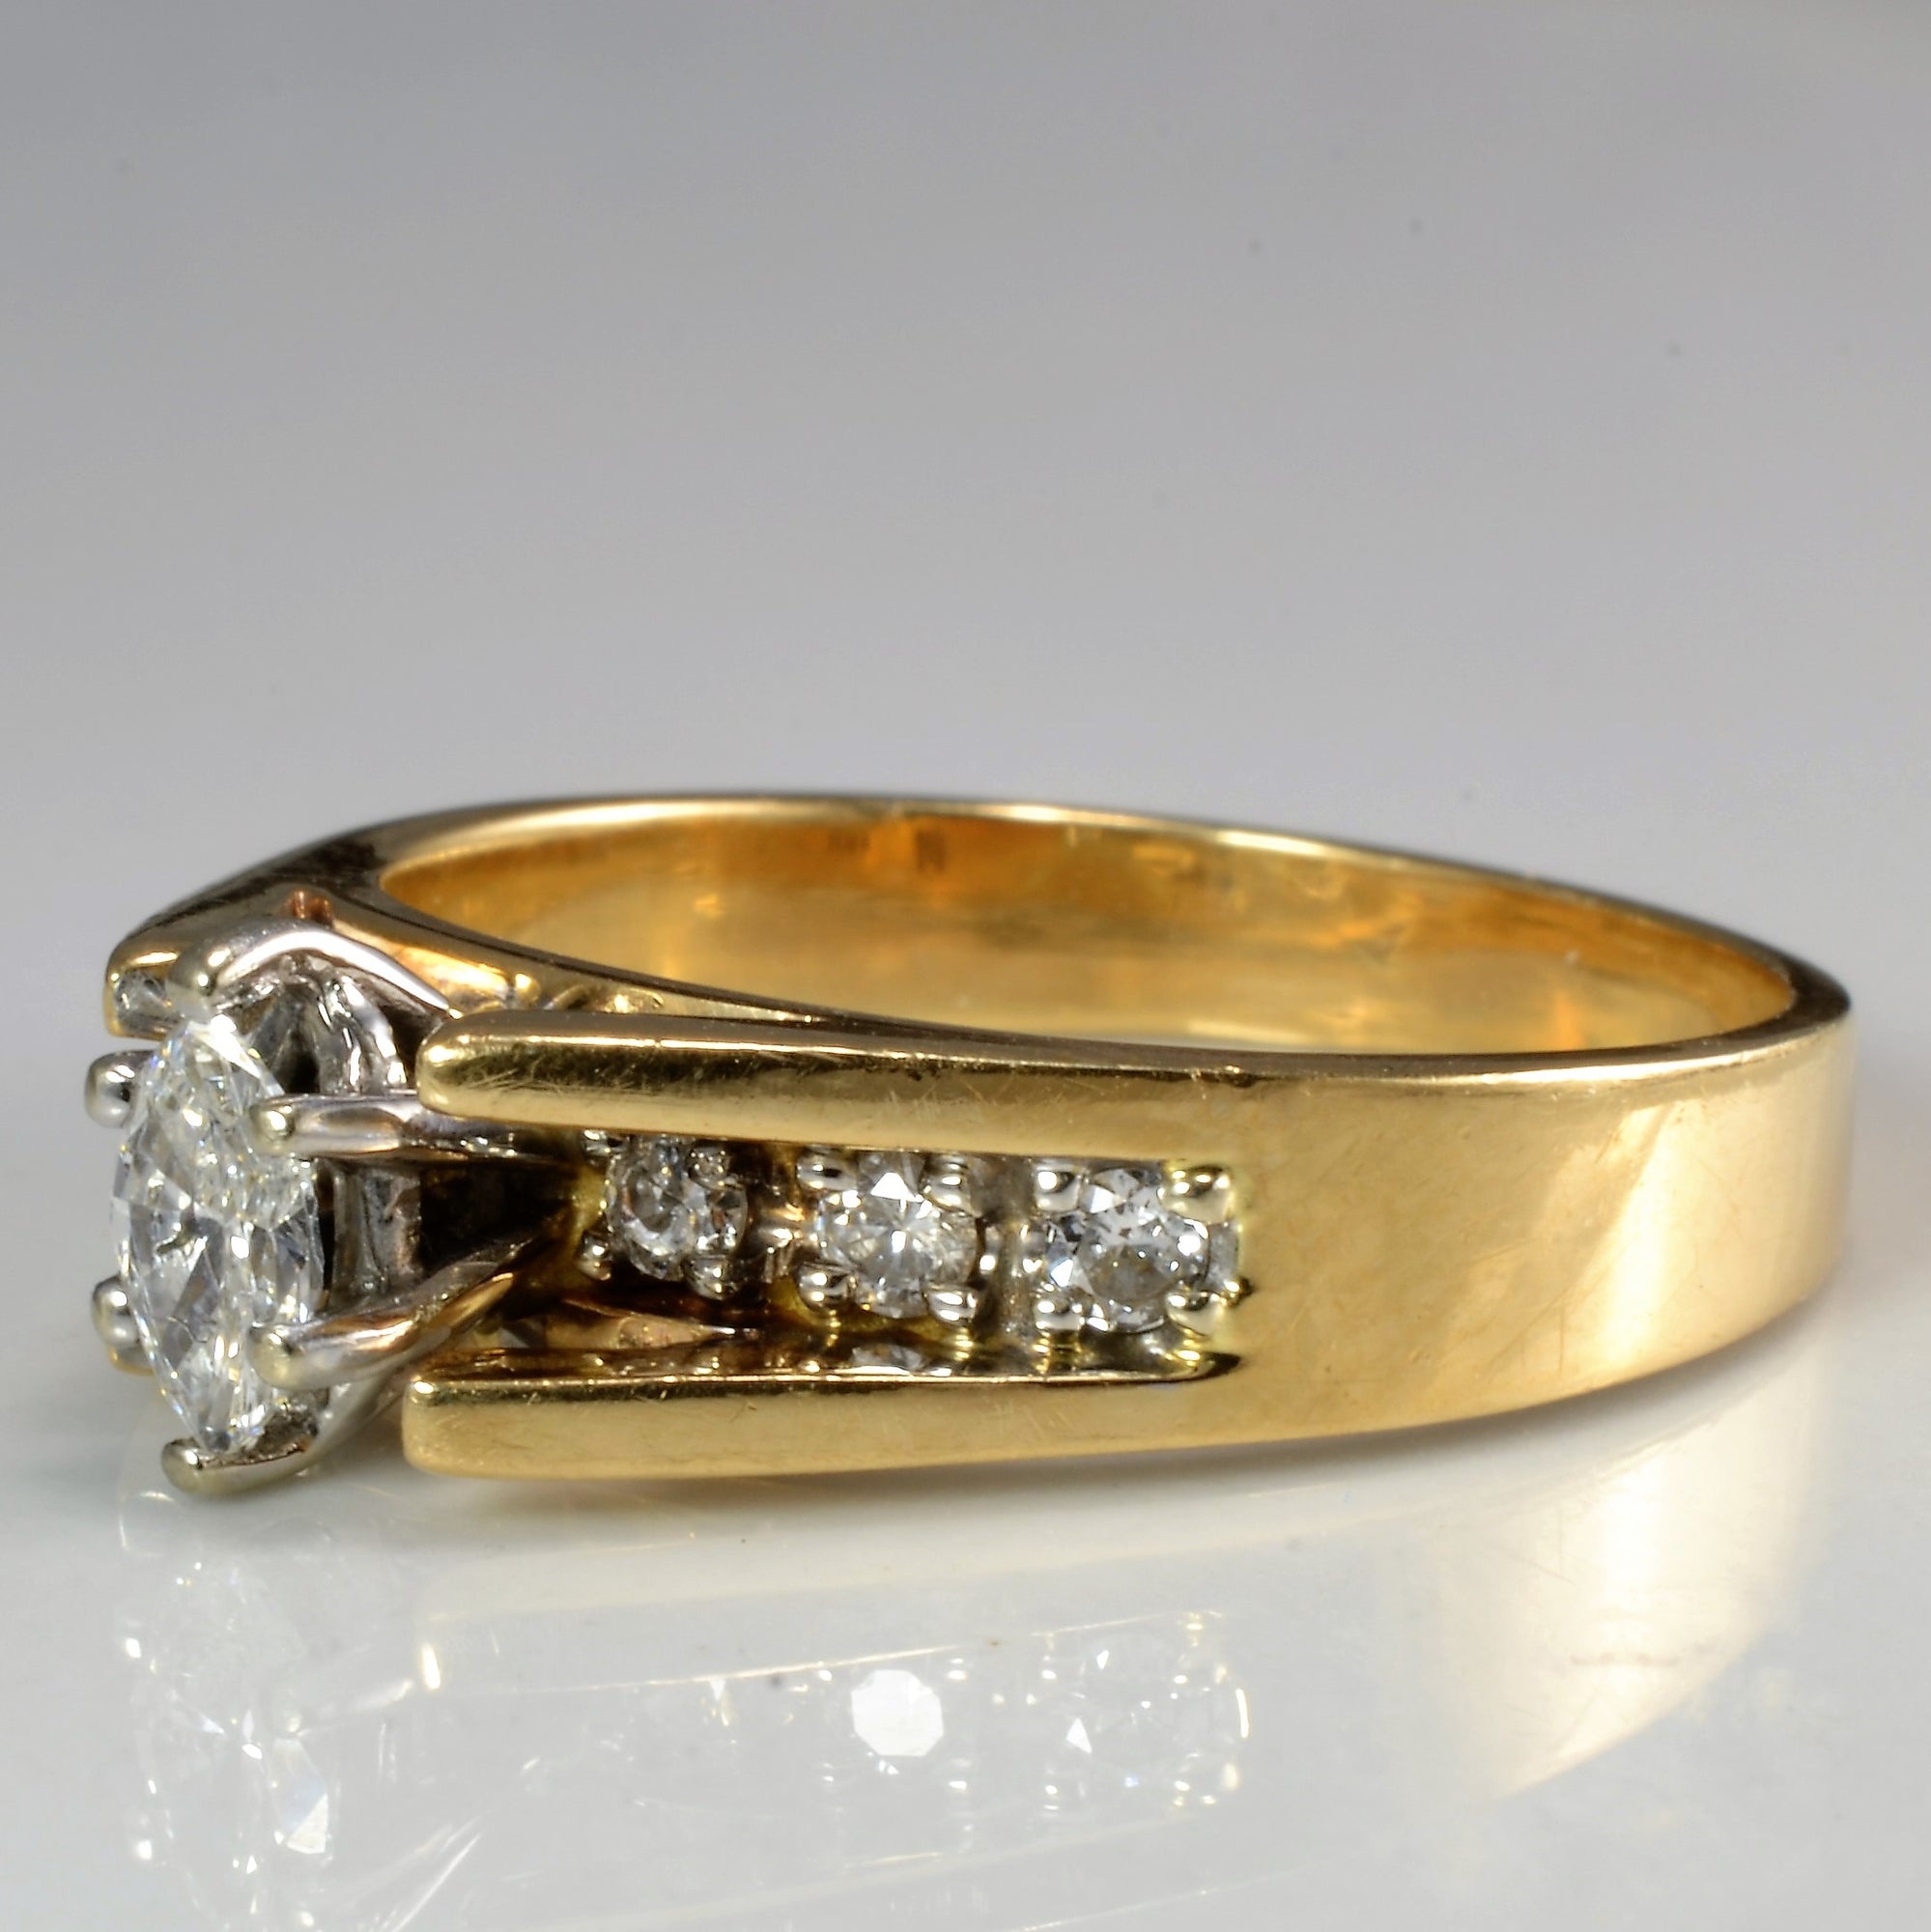 Tapered Marquise Diamond & Accents Engagement Ring | 0.37 ctw, SZ 6.5 |